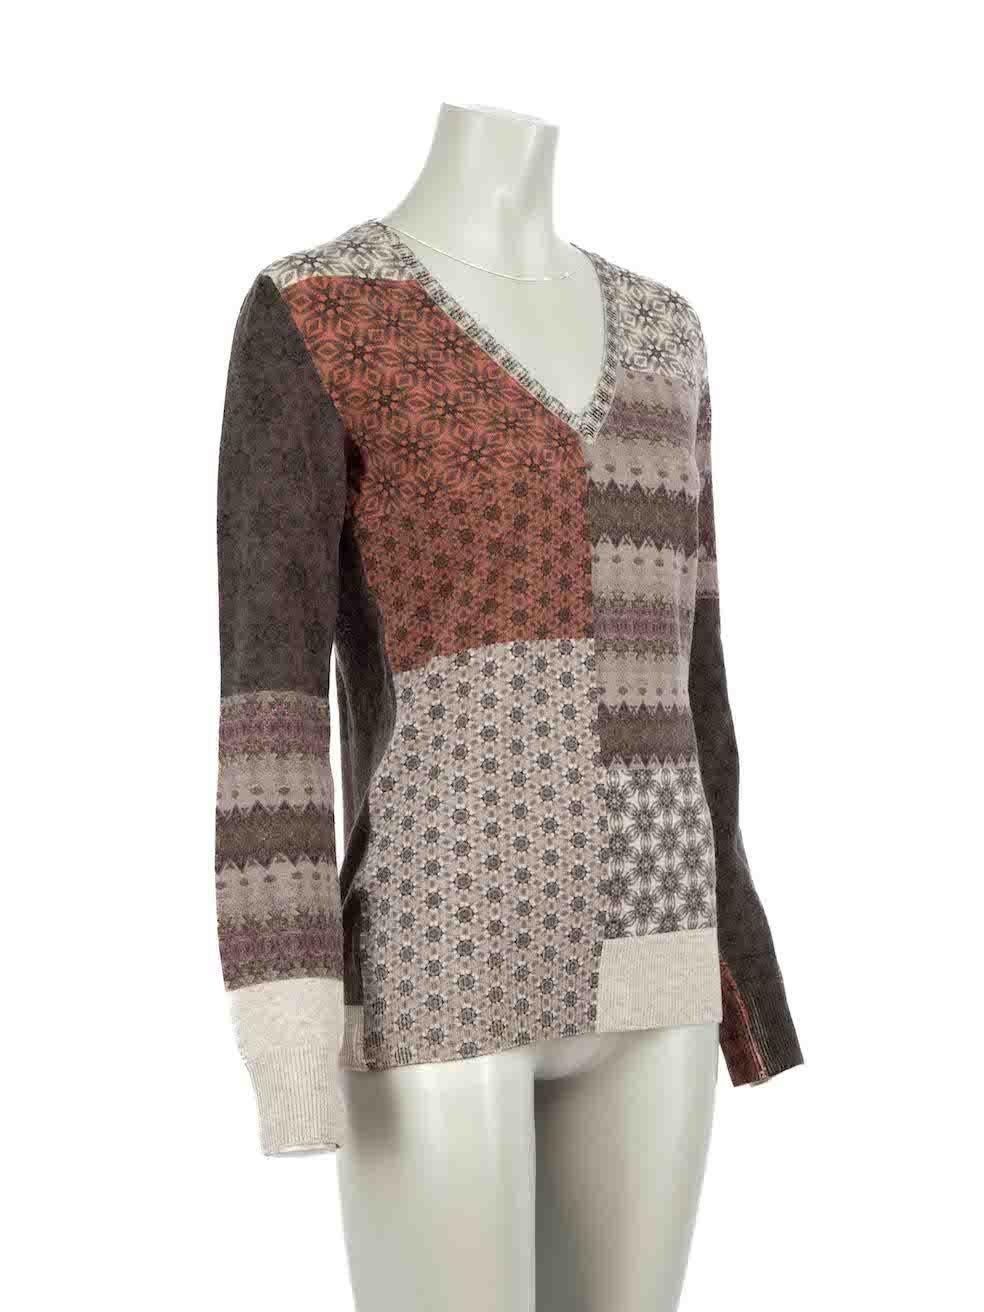 CONDITION is Very good. Hardly any visible wear to jumper is evident on this used Etro designer resale item.
 
Details
Grey
Wool
Knit jumper
V-neck
Patchwork pattern
 
Made in Italy
 
Composition
70% Wool, 30% Cashmere
Care instructions: